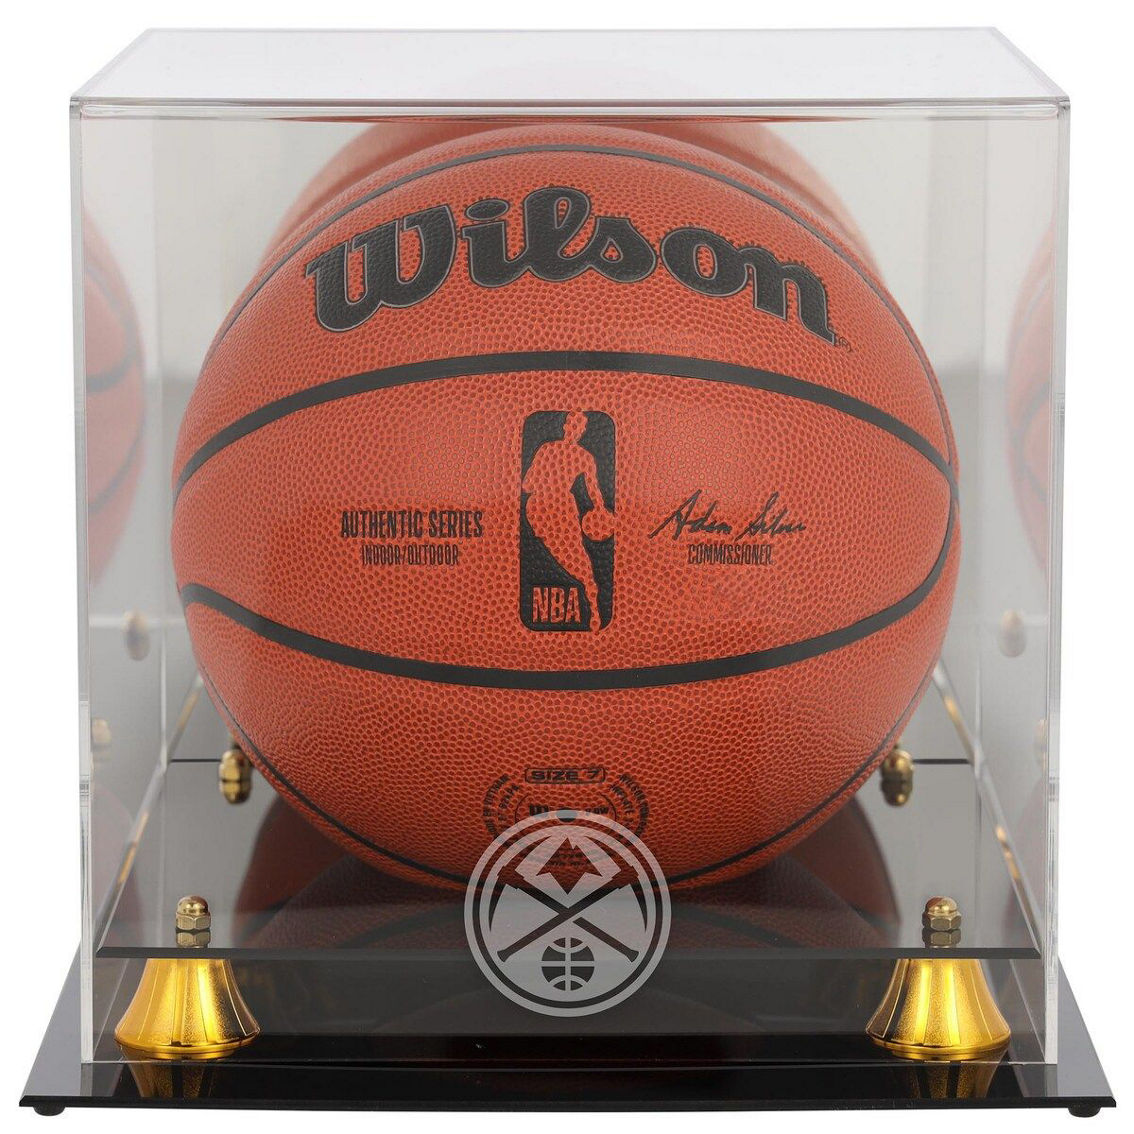 Fanatics Authentic Denver Nuggets Golden Classic Team Logo Basketball Display Case - Image 1 of 2